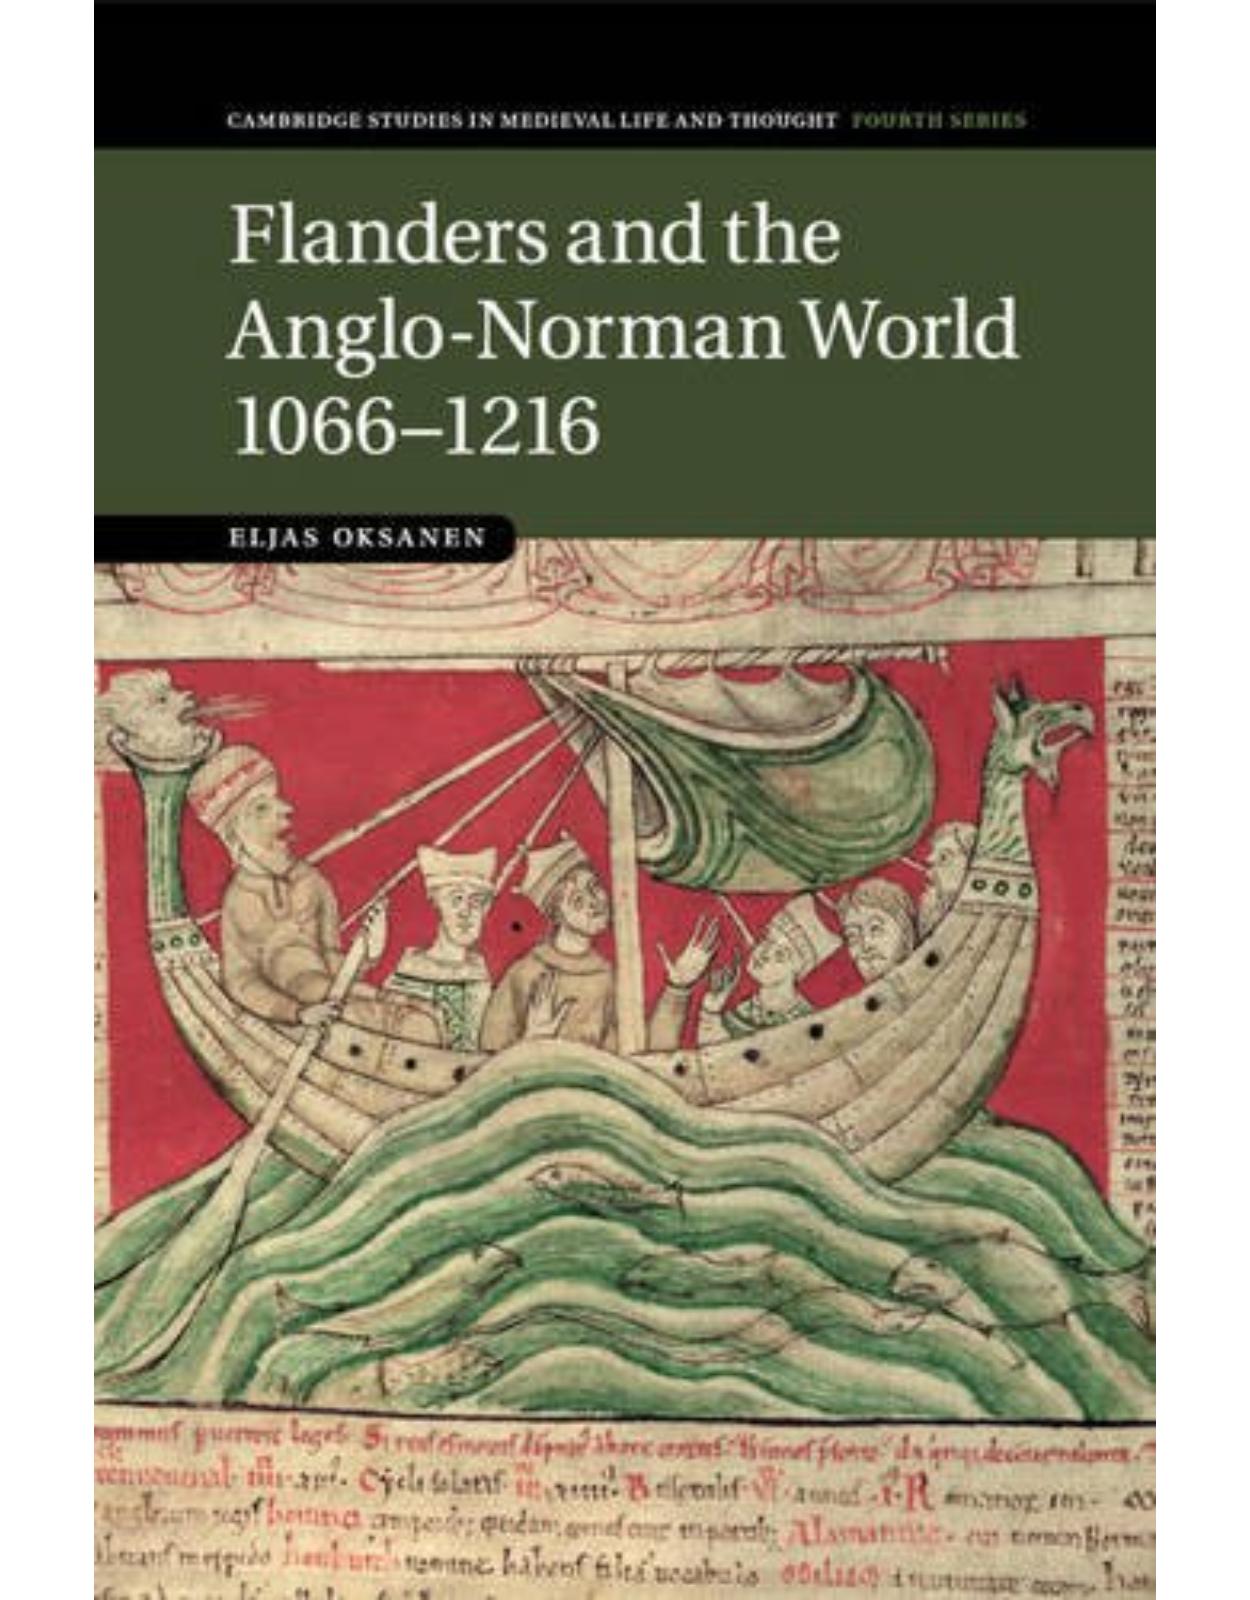 Flanders and the Anglo-Norman World, 1066-1216 (Cambridge Studies in Medieval Life and Thought: Fourth Series)